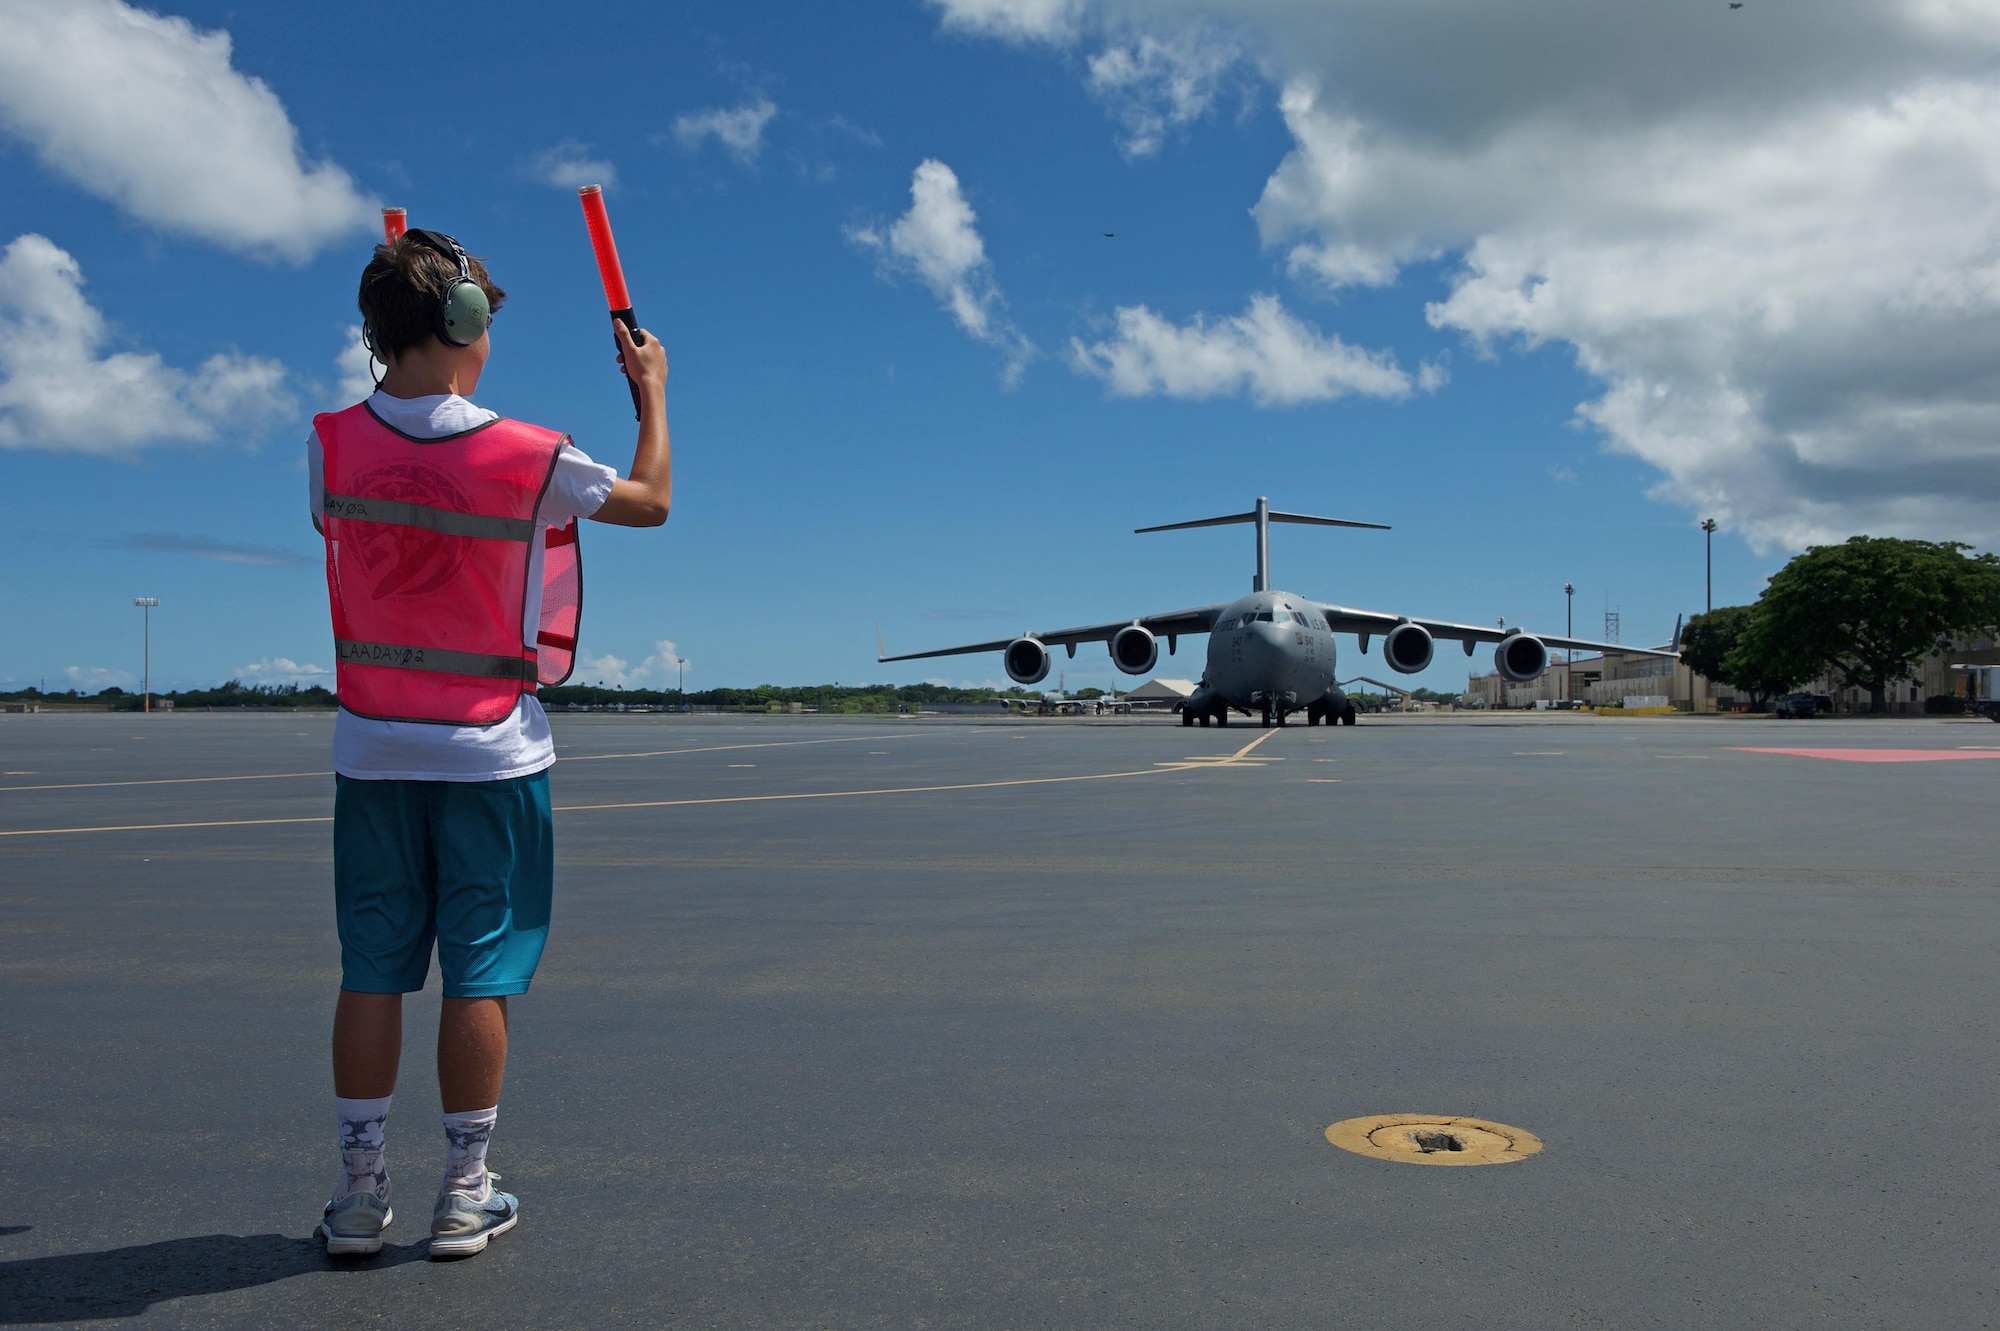 Luke Dillon, son of U.S. Air Force Maj. Gen. Mark Dillon, Pacific Air Forces vice commander, helps marshal a C-17 Globemaster III that his father flew on for his fini flight at Joint Base Pearl Harbor-Hickam, Hawaii, June 12, 2017. With Dillon's retirement approaching, the fini-flight is the capstone event in his flying career. Moments after his arrival, Dillon was greeted by family and friends and soaked in water and champagne to celebrate his Air Force career. (U.S. Air Force photo/Tech. Sgt. Kamaile Chan)